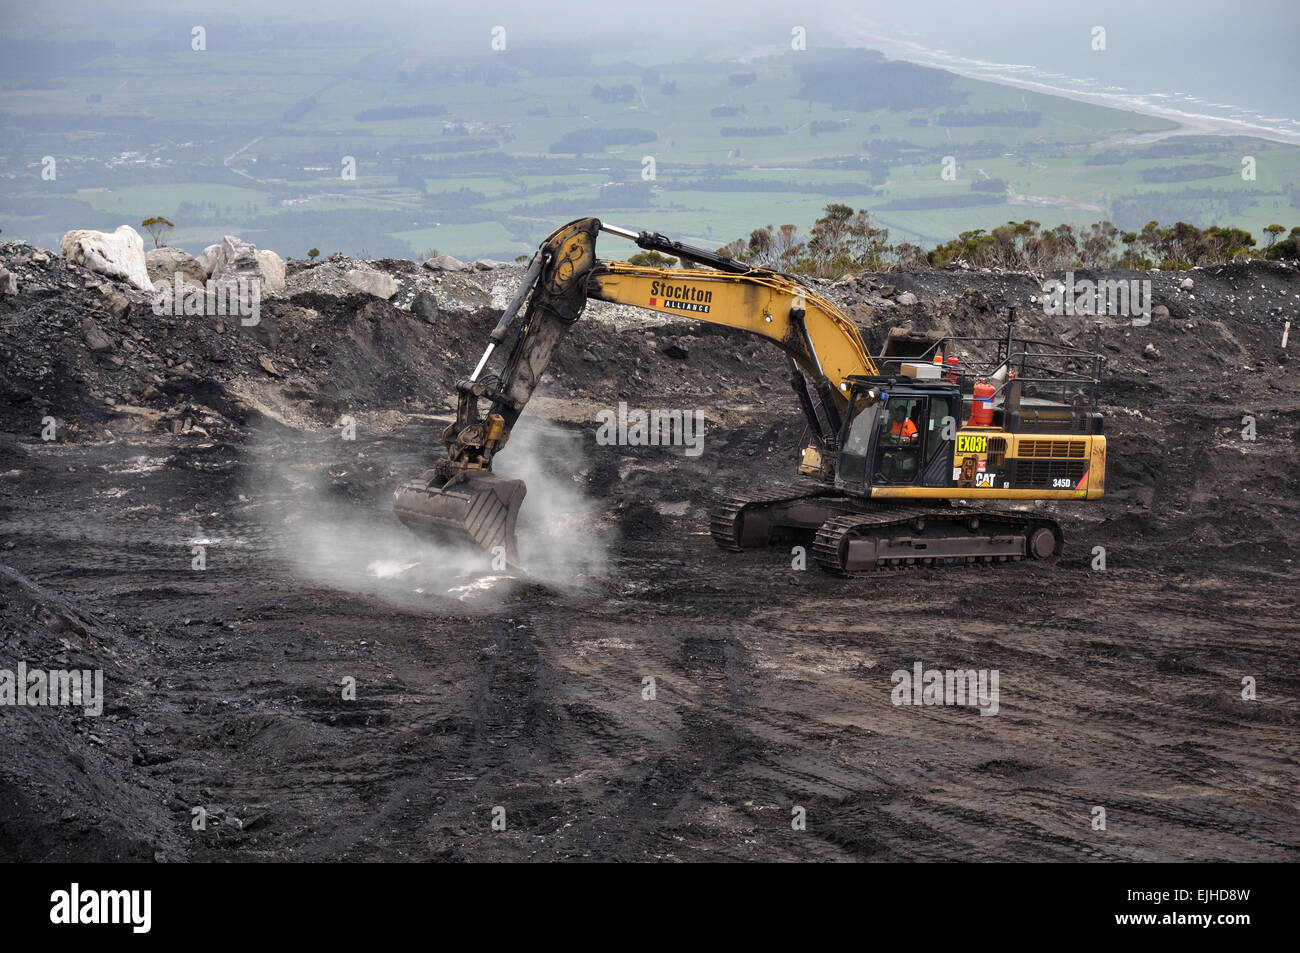 WESTPORT, NEW ZEALAND, MARCH 4, 2015: A digger removes high grade coal from a seam at an open cast coal mine Stock Photo